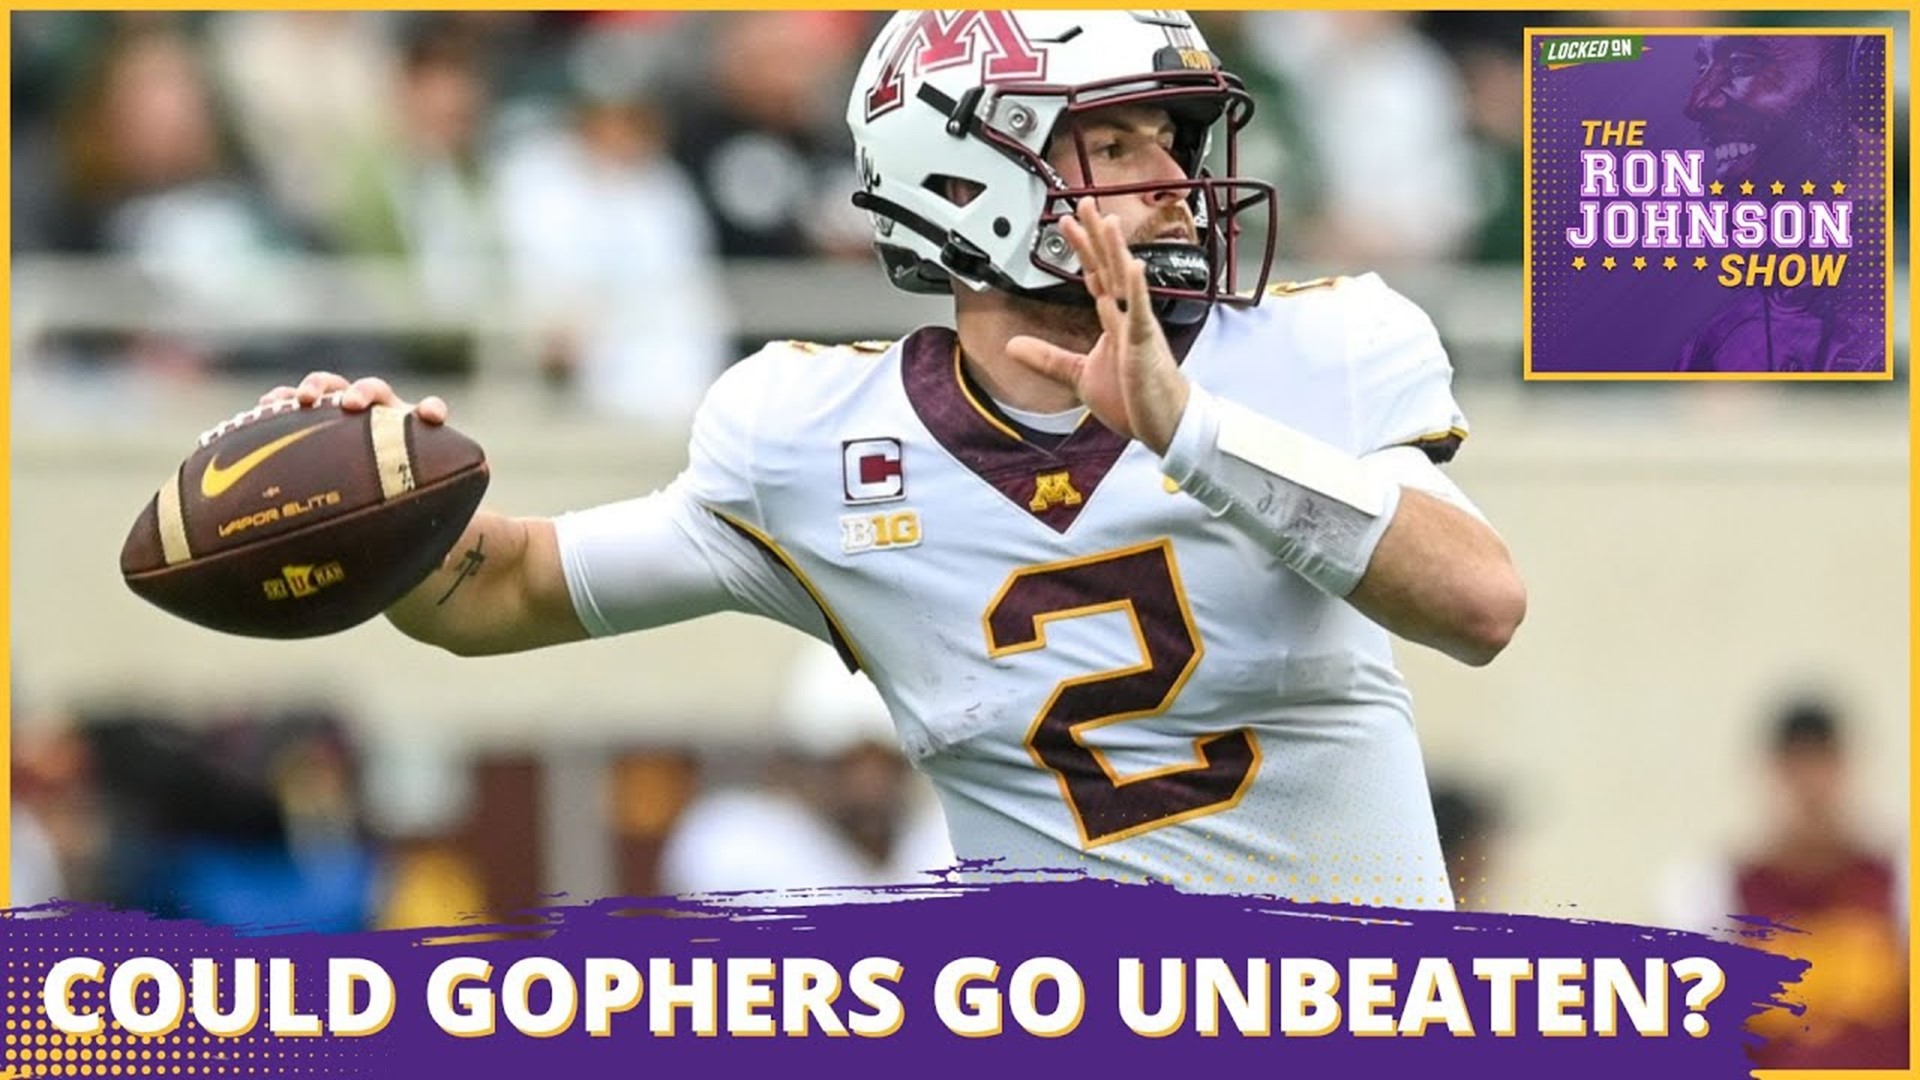 Could the Minnesota Golden Gophers Be a Top 5 Team? | The Ron Johnson Show